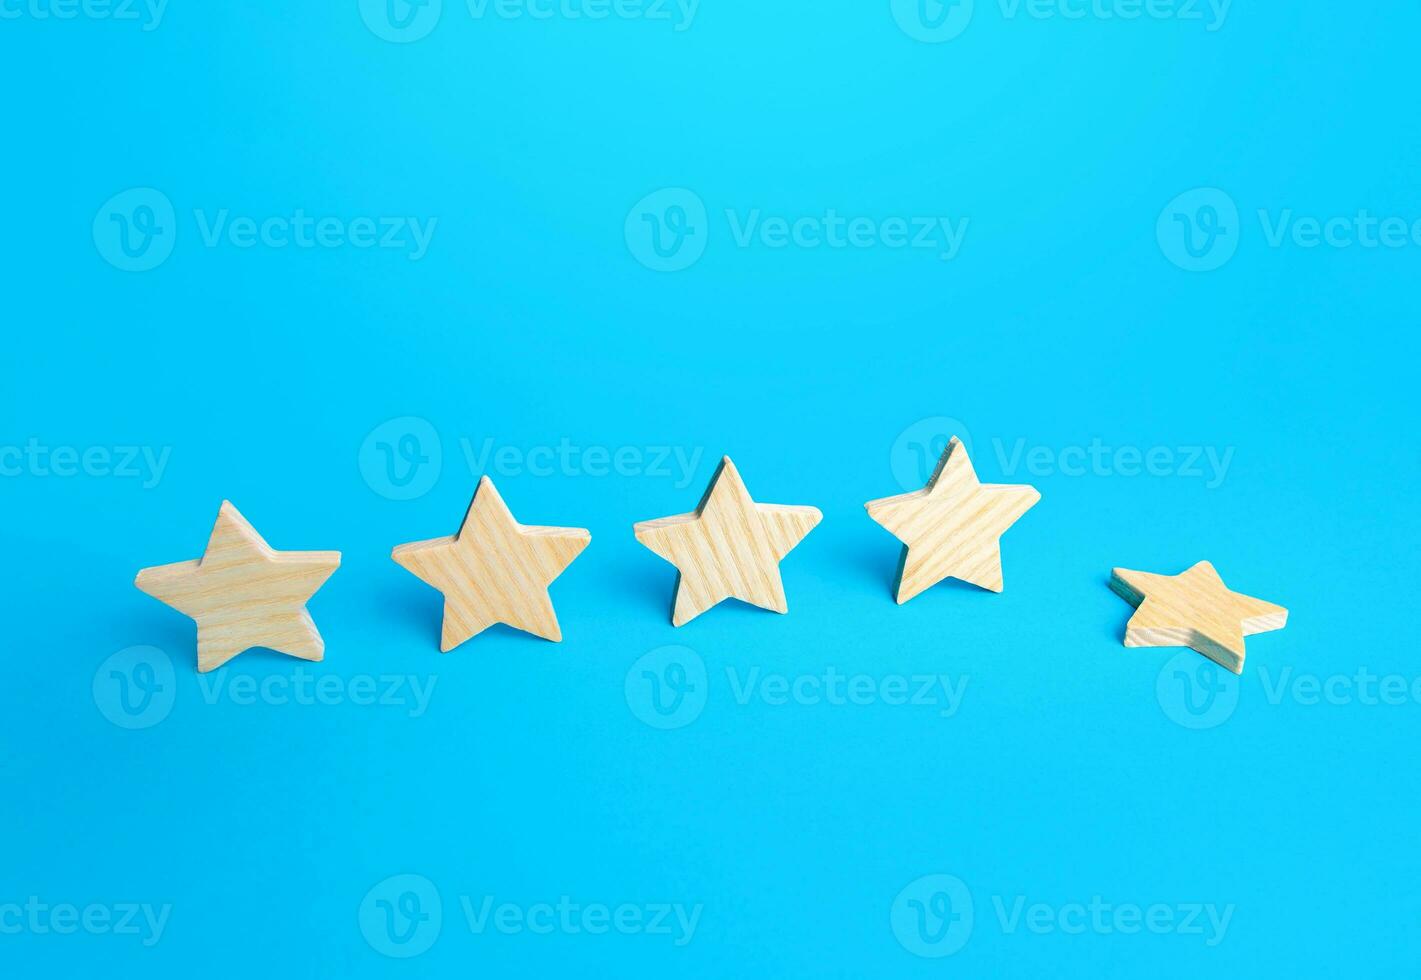 One of the five stars fell down. Loss of the fifth star. Drop in rating, prestige and reputation reduction. Lowering and demotion. Do not meet the requirements. Decline in quality and level of service photo